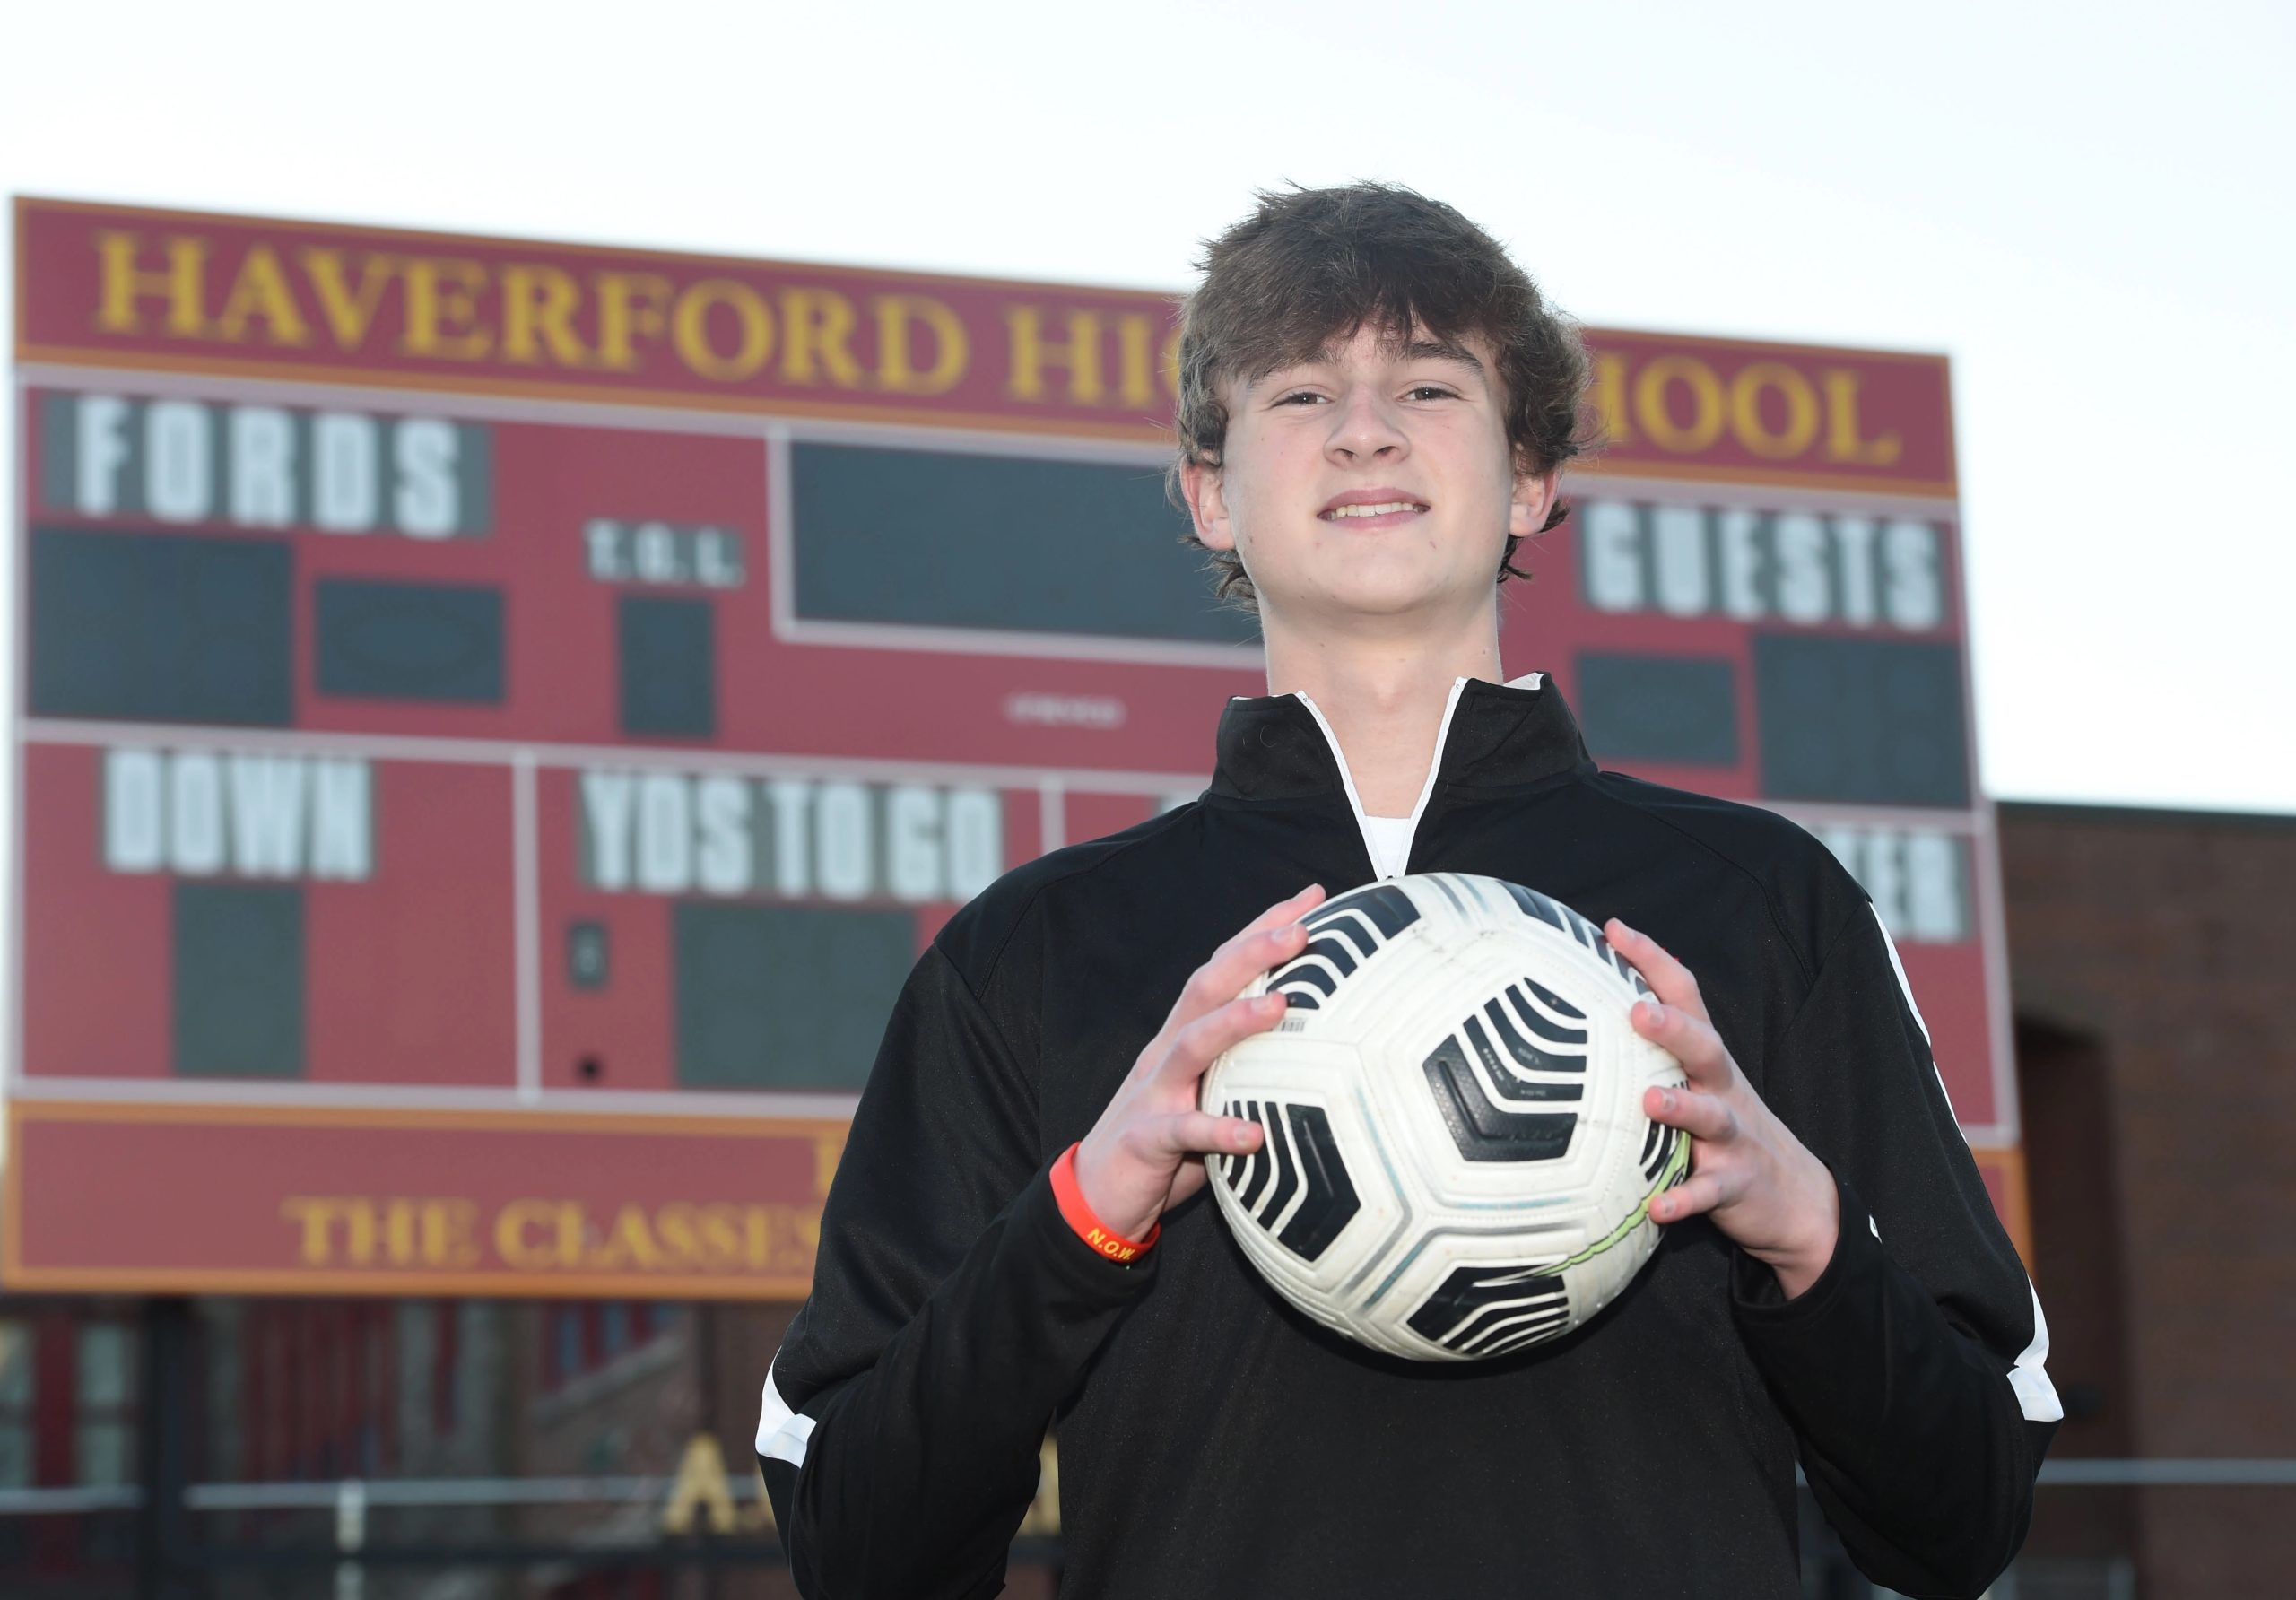 All-Delco Boys Soccer Boyle made history for Haverford team on the rise